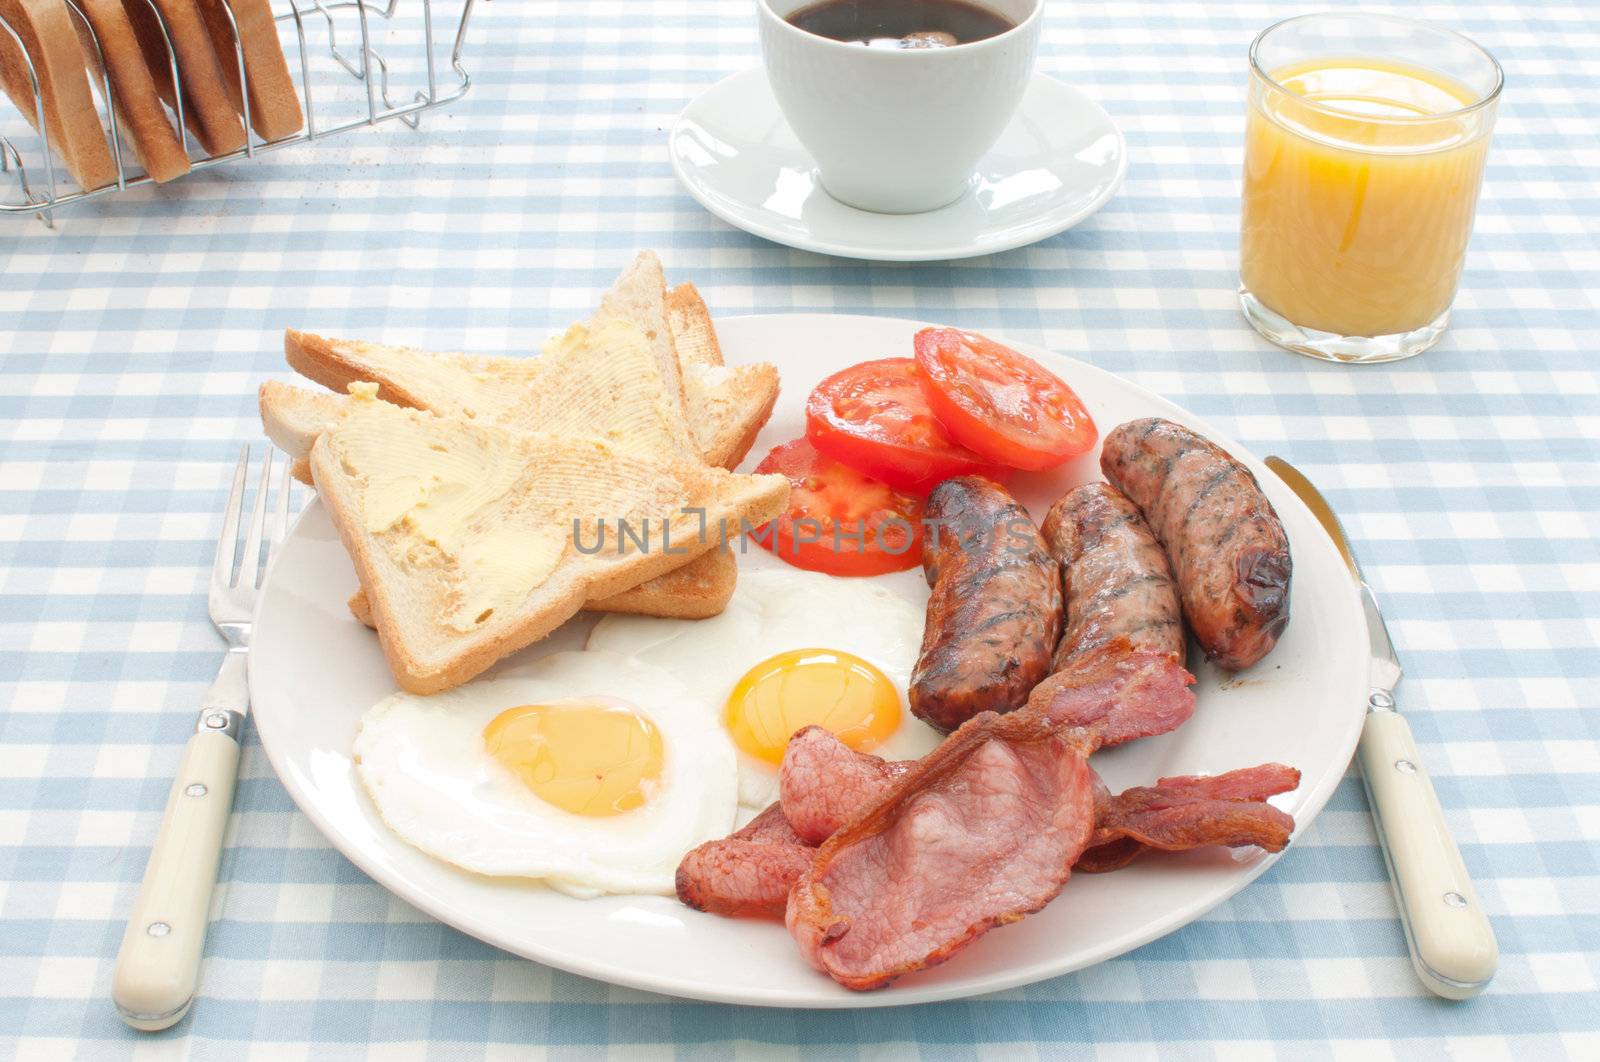 Delicious english breakfast fry up with sausages, eggs and bacon